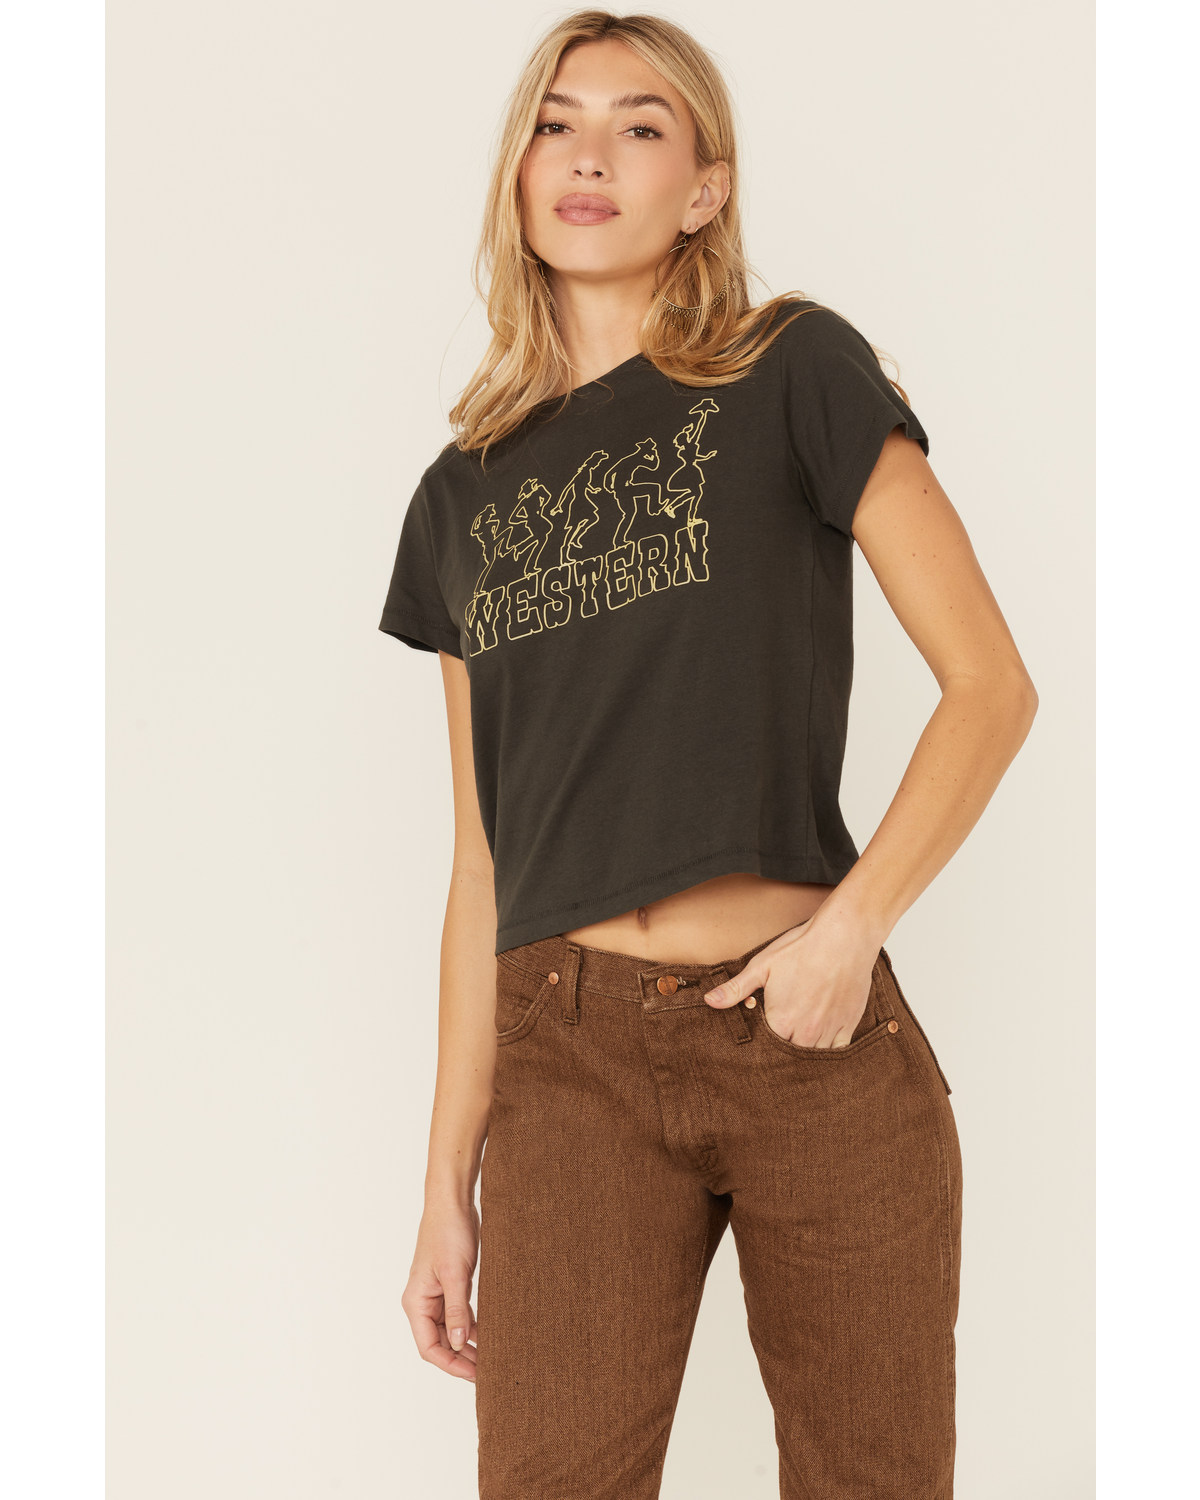 Blended Women's Western Graphic Tee